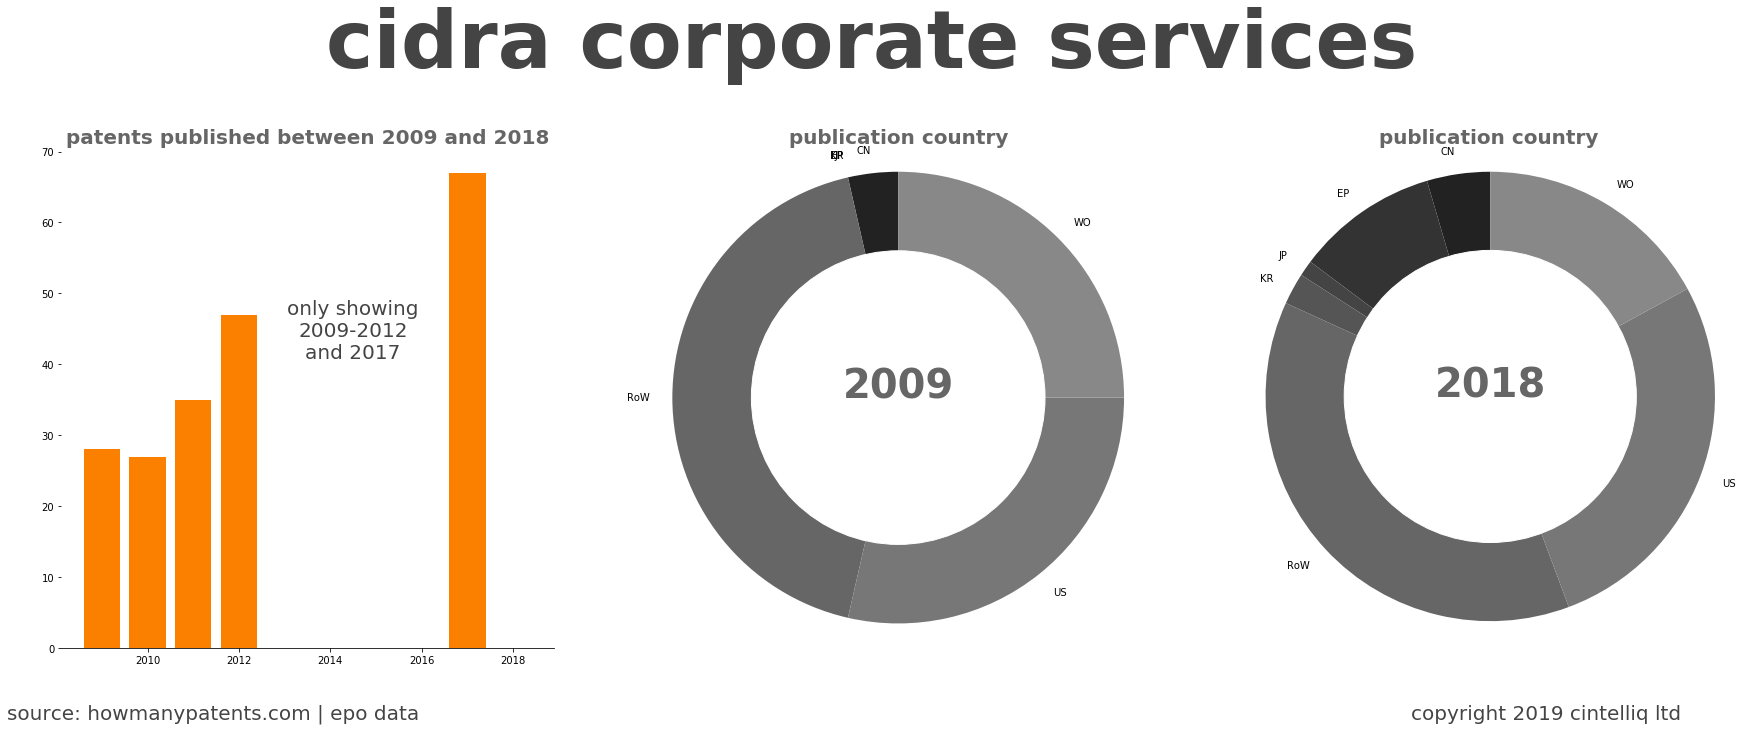 summary of patents for Cidra Corporate Services